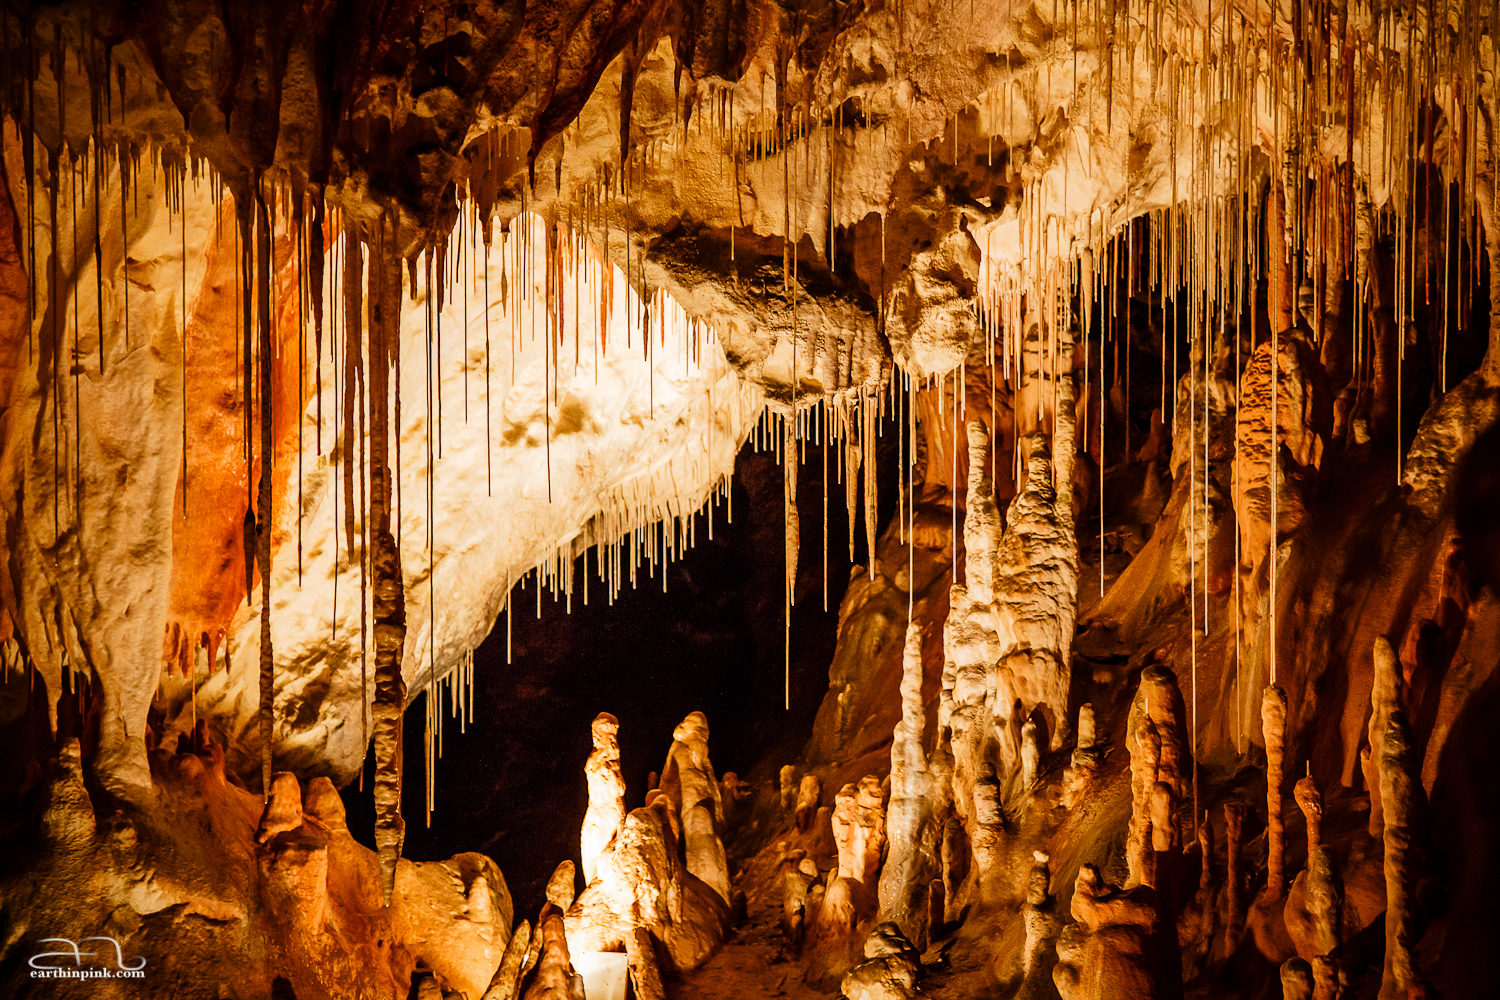 Spectacular formations in the Gombasek Cave, Slovakia